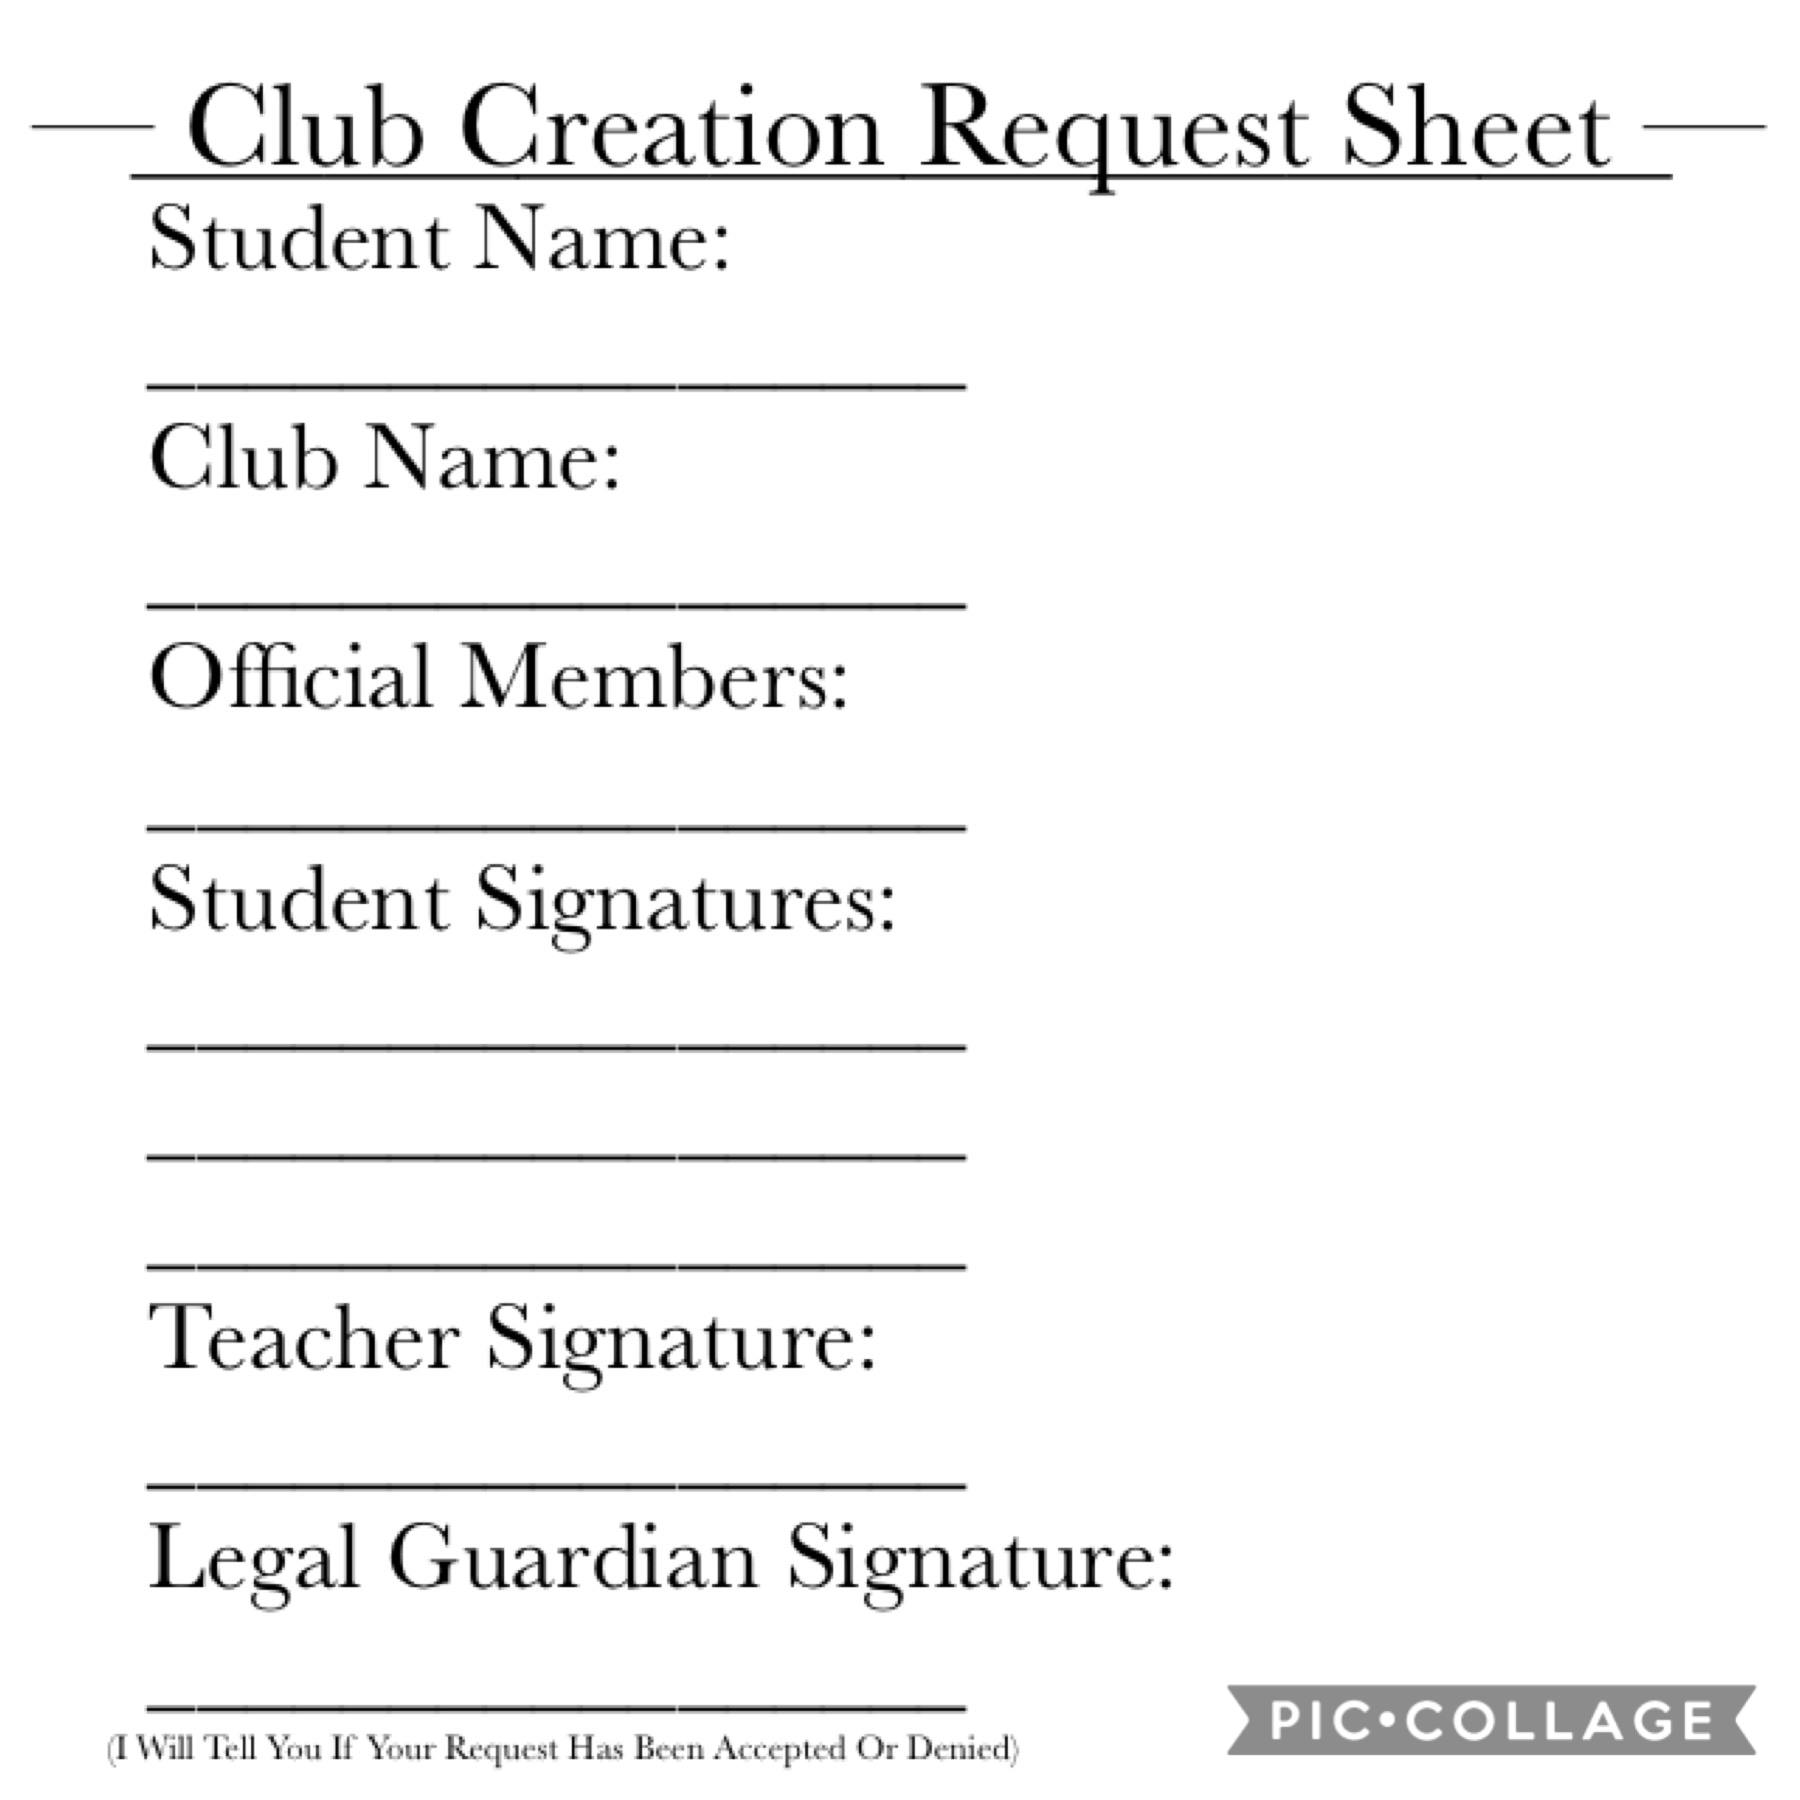 You Can Fill This Out At Any Point In The RP, I Would Recommend Waiting Till You Have At Least One Or Two Other People To Join Your Potential Clubs/Extracurricular Activities